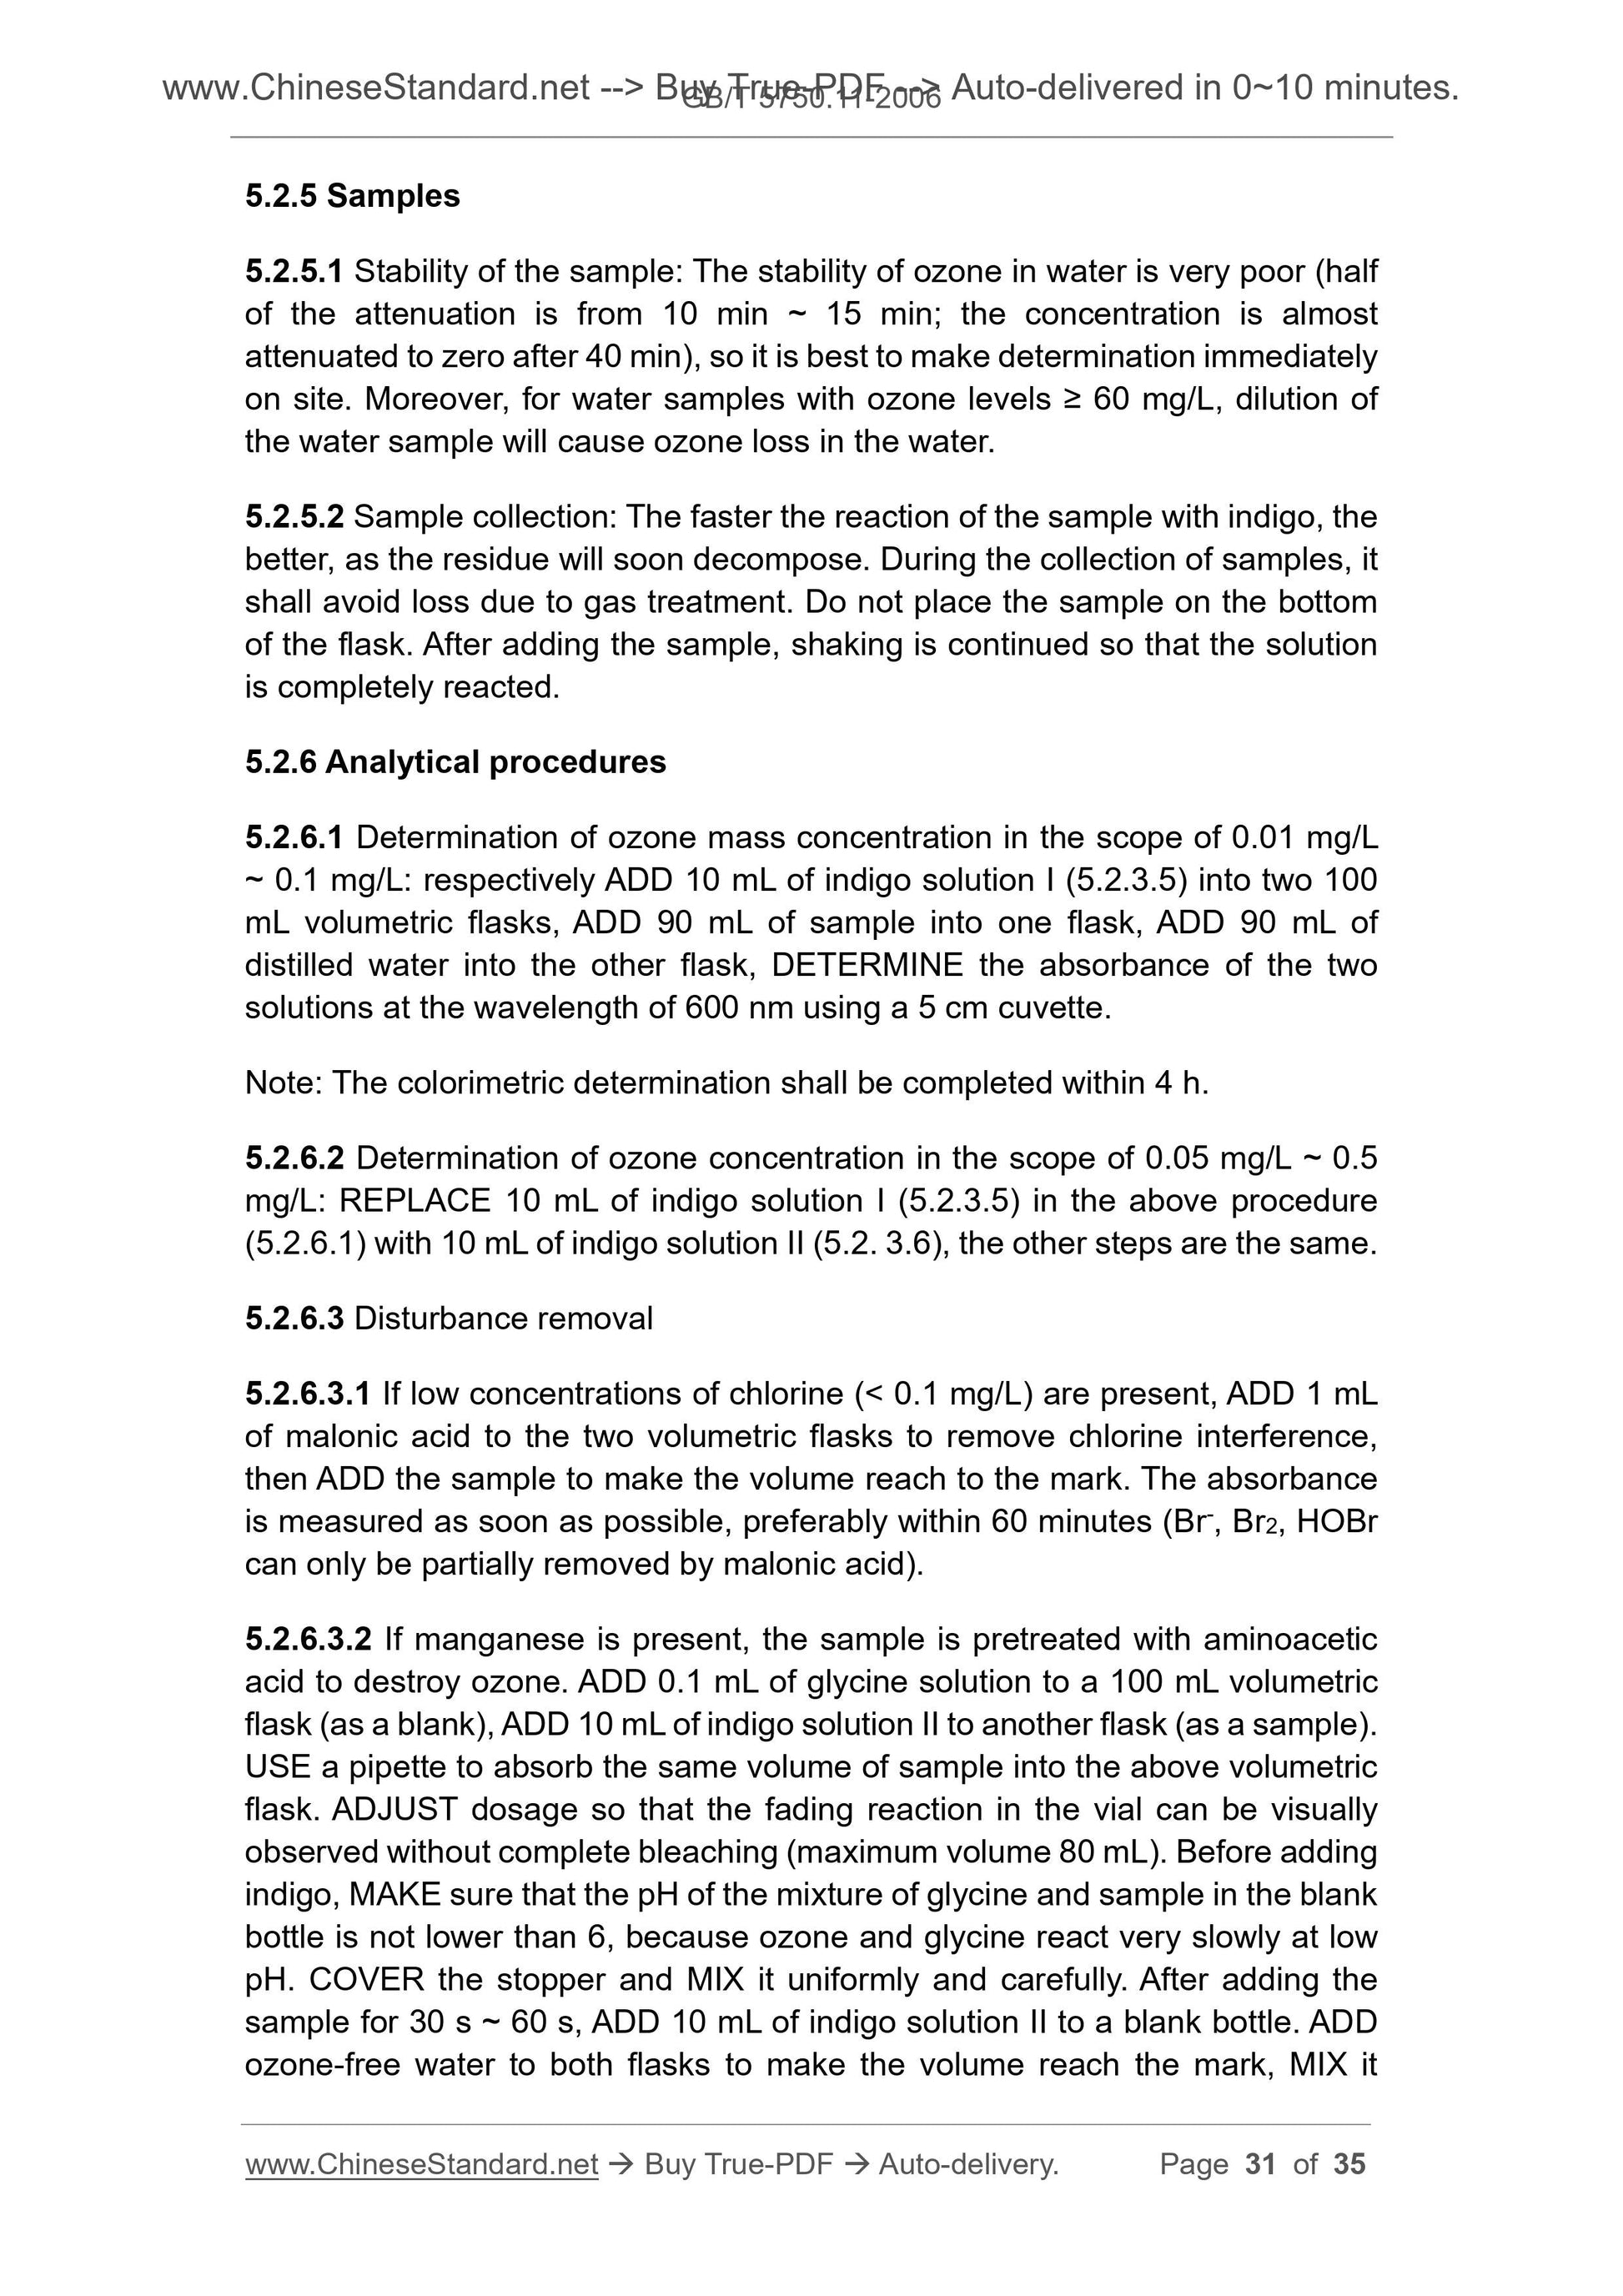 GB/T 5750.11-2006 Page 11